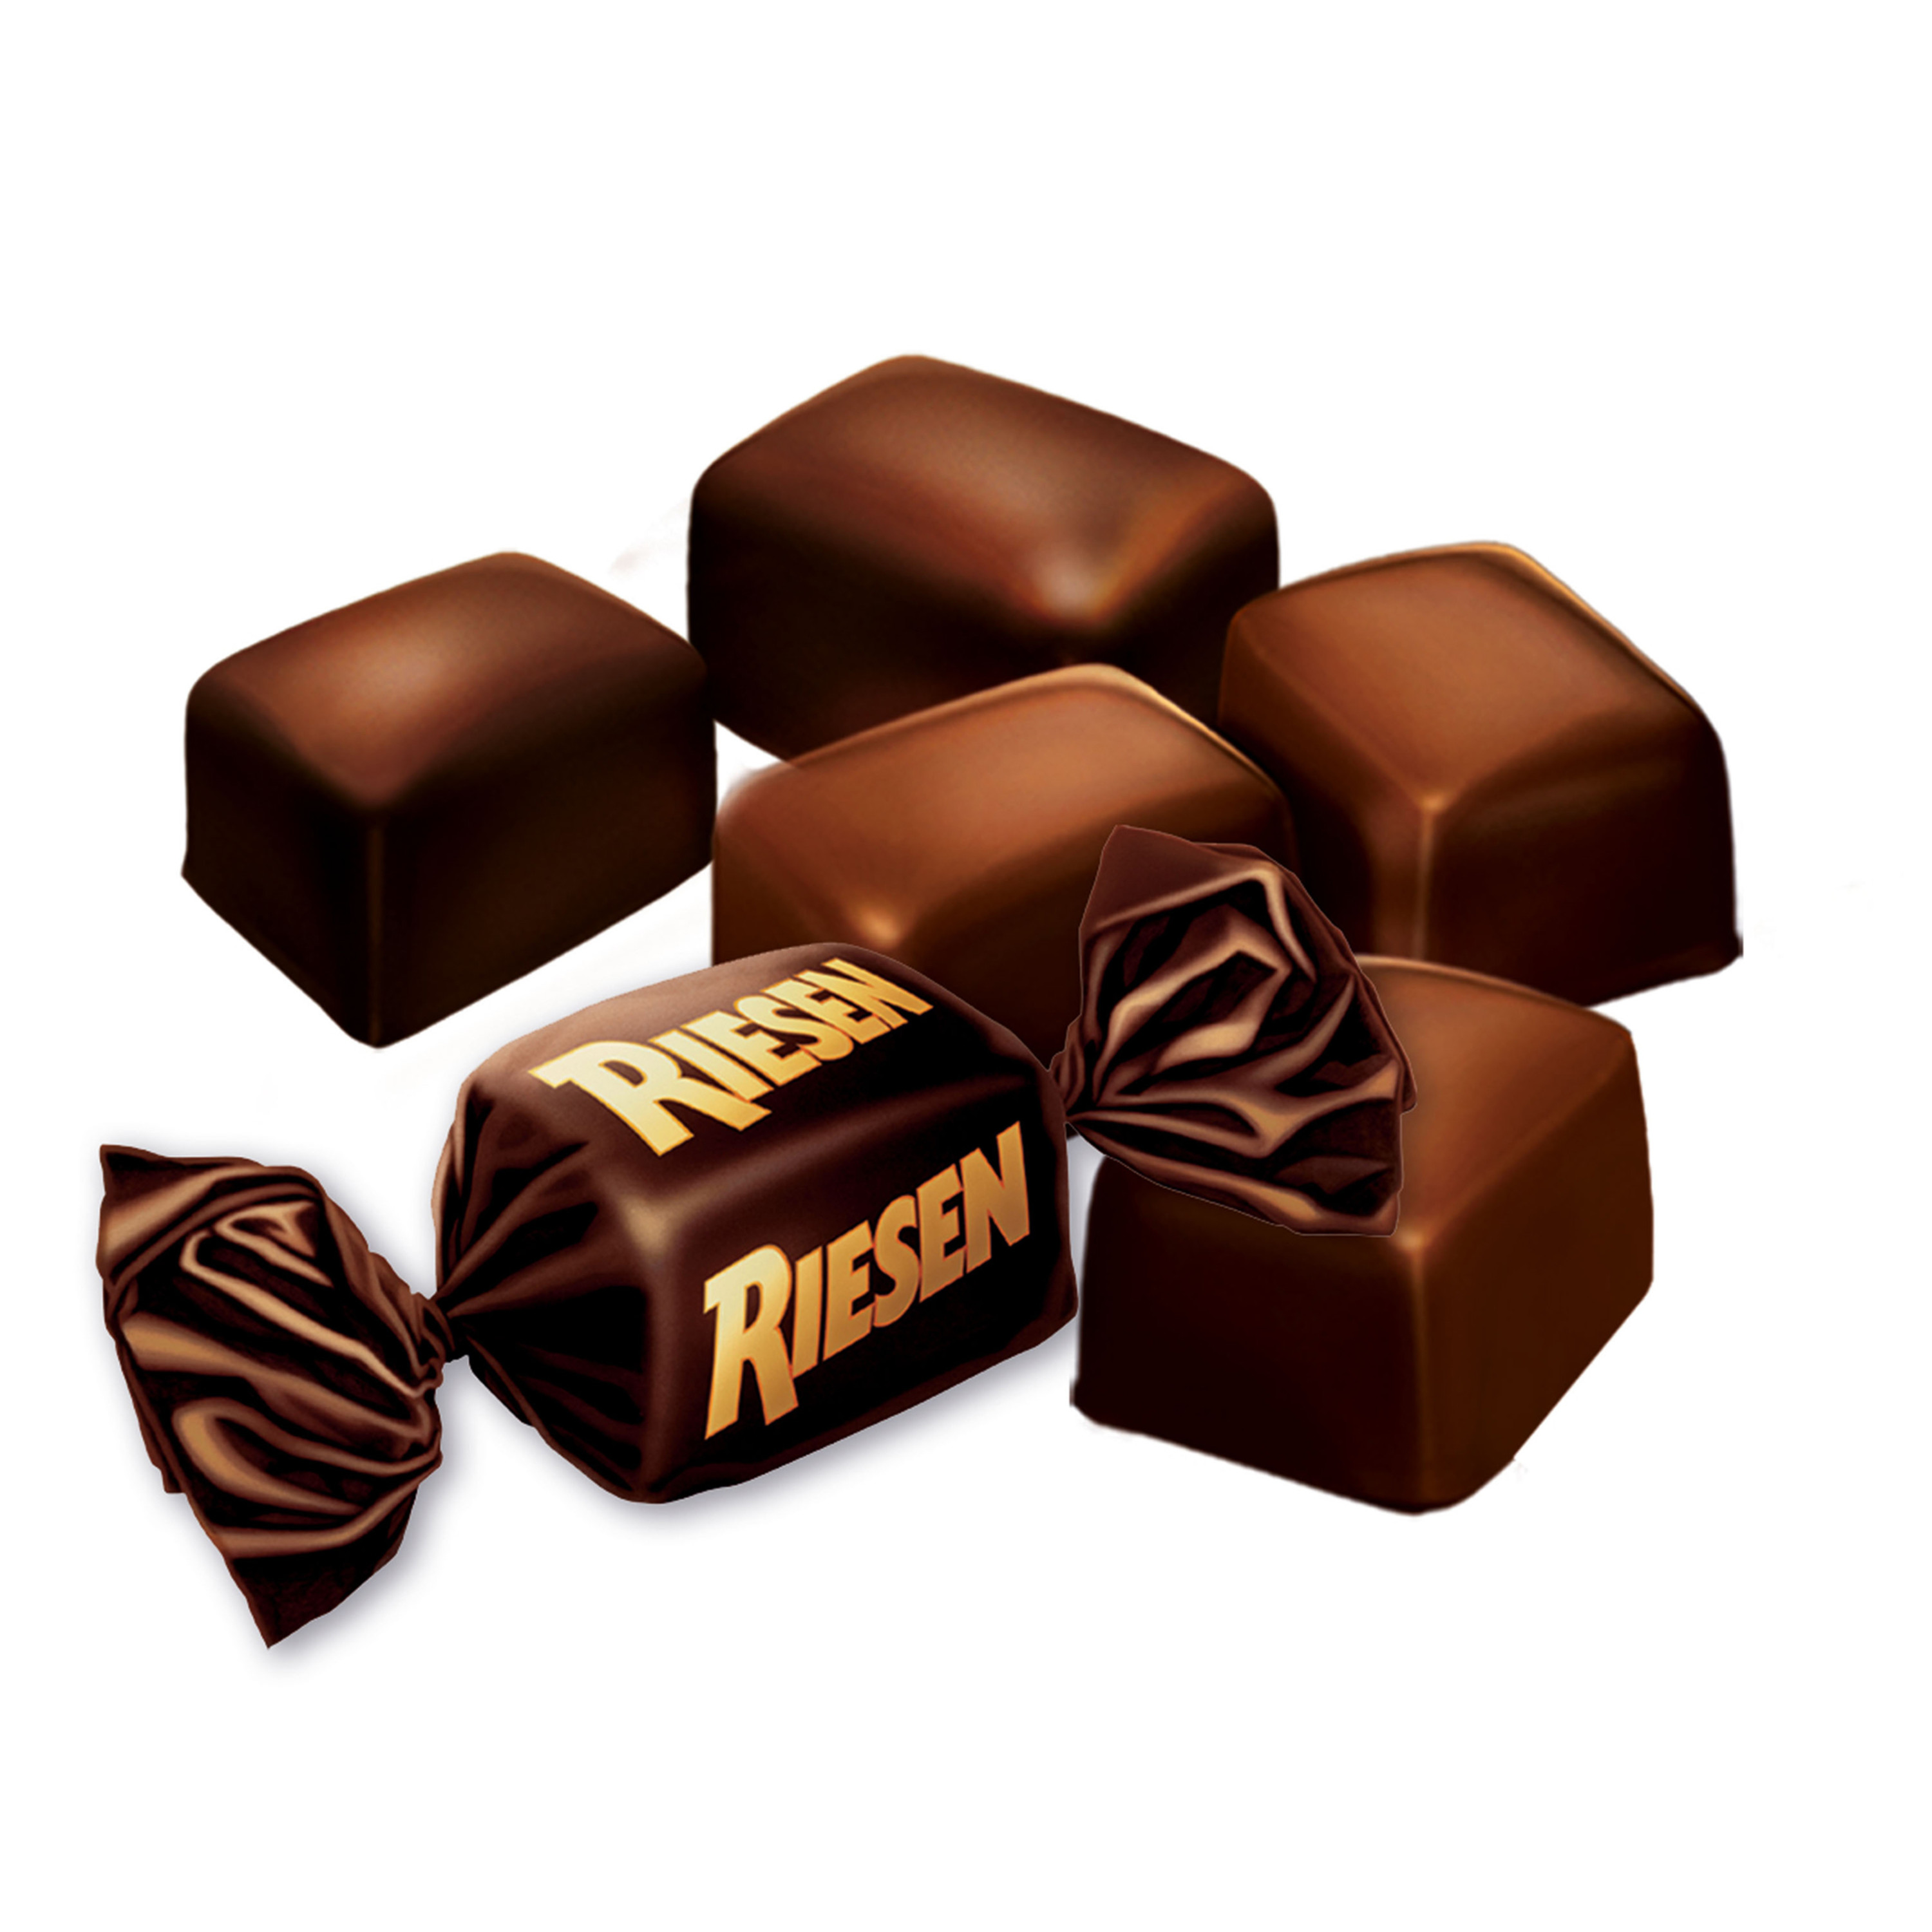 RIESEN Chewy Chocolate Covered Caramel Candy, 30 oz - image 4 of 7